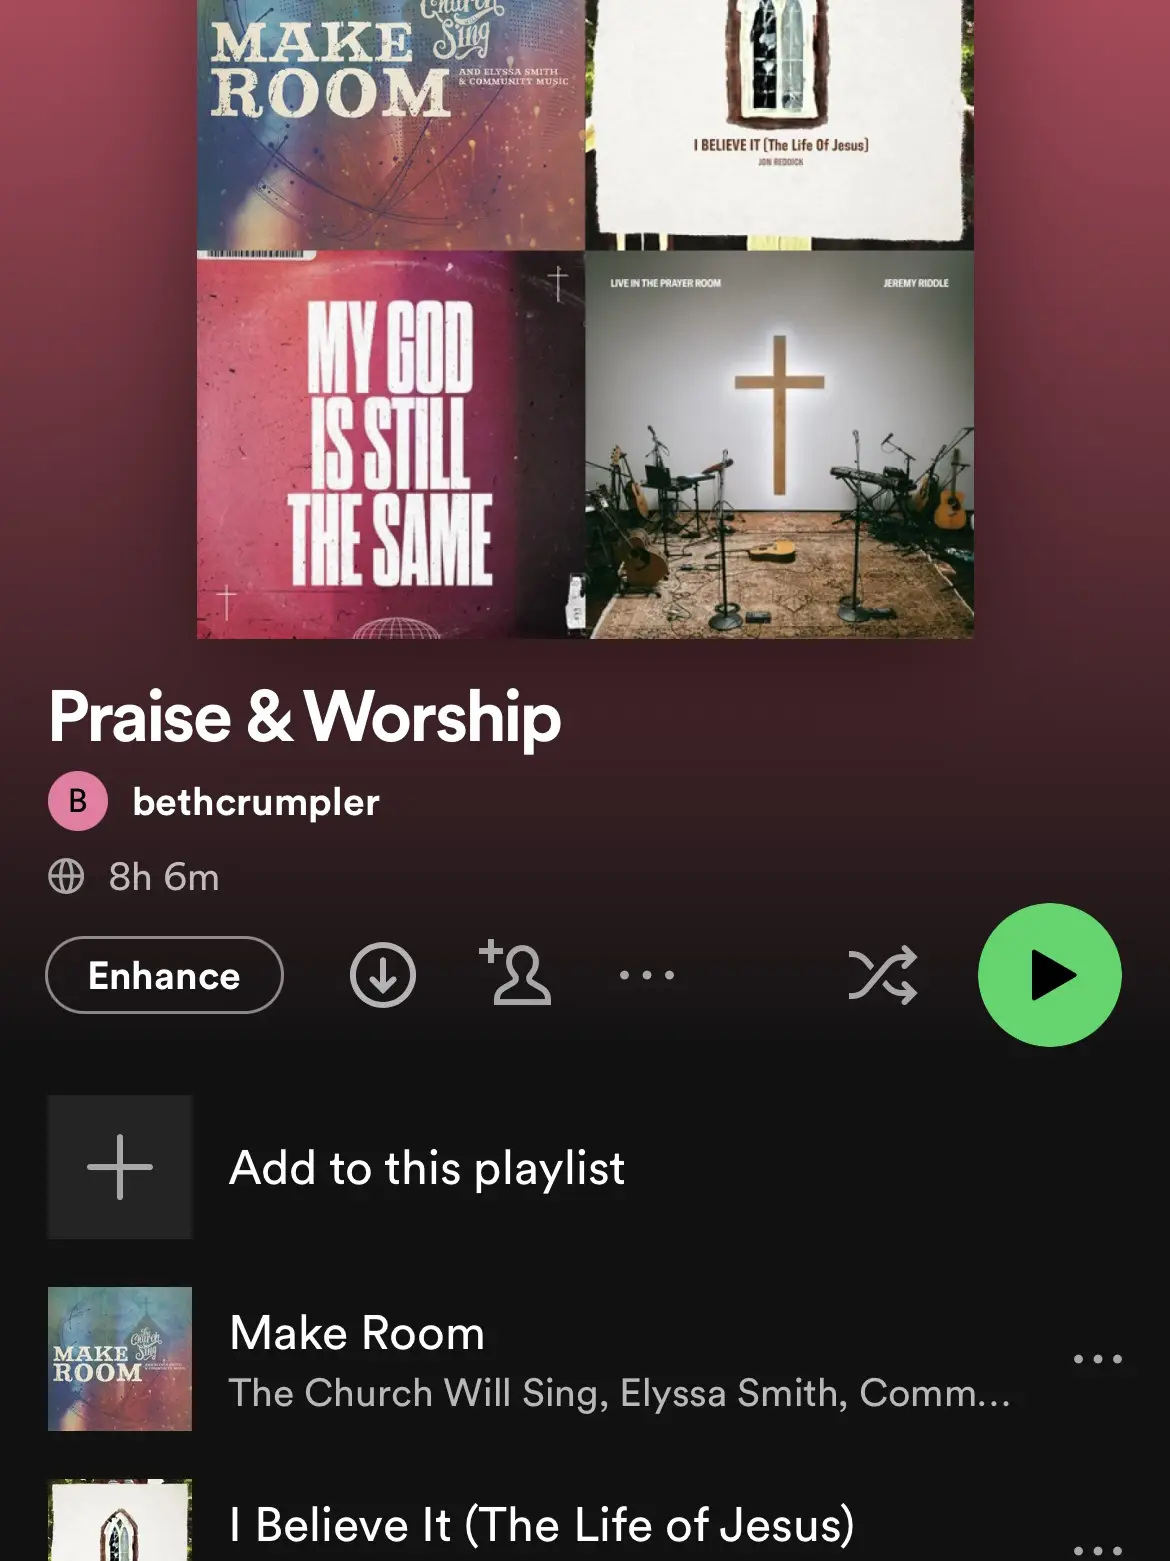 This Is Hillsong Worship - playlist by Spotify